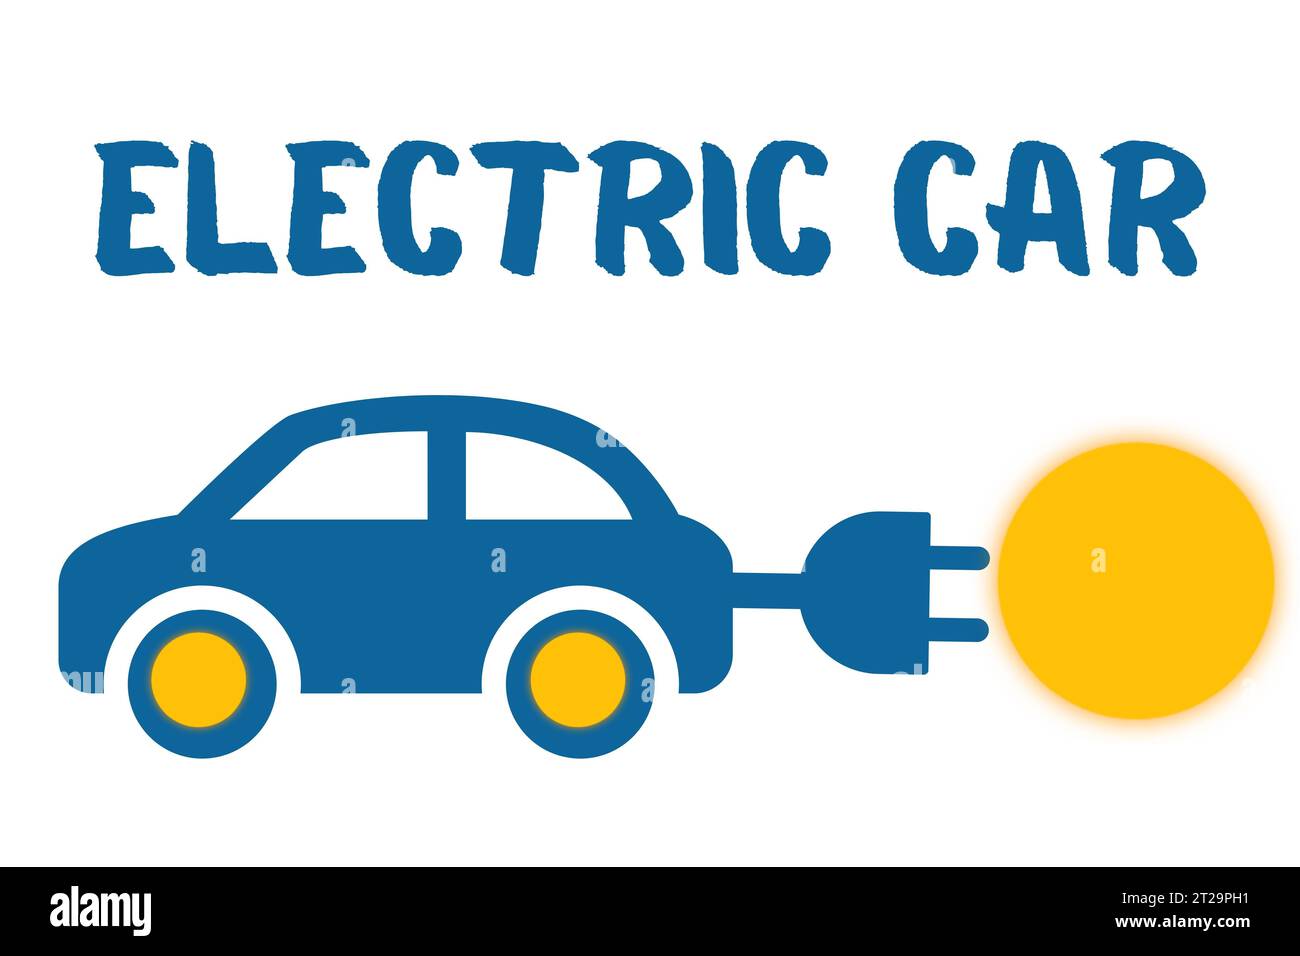 Electric Car Illustrations Stock Photo